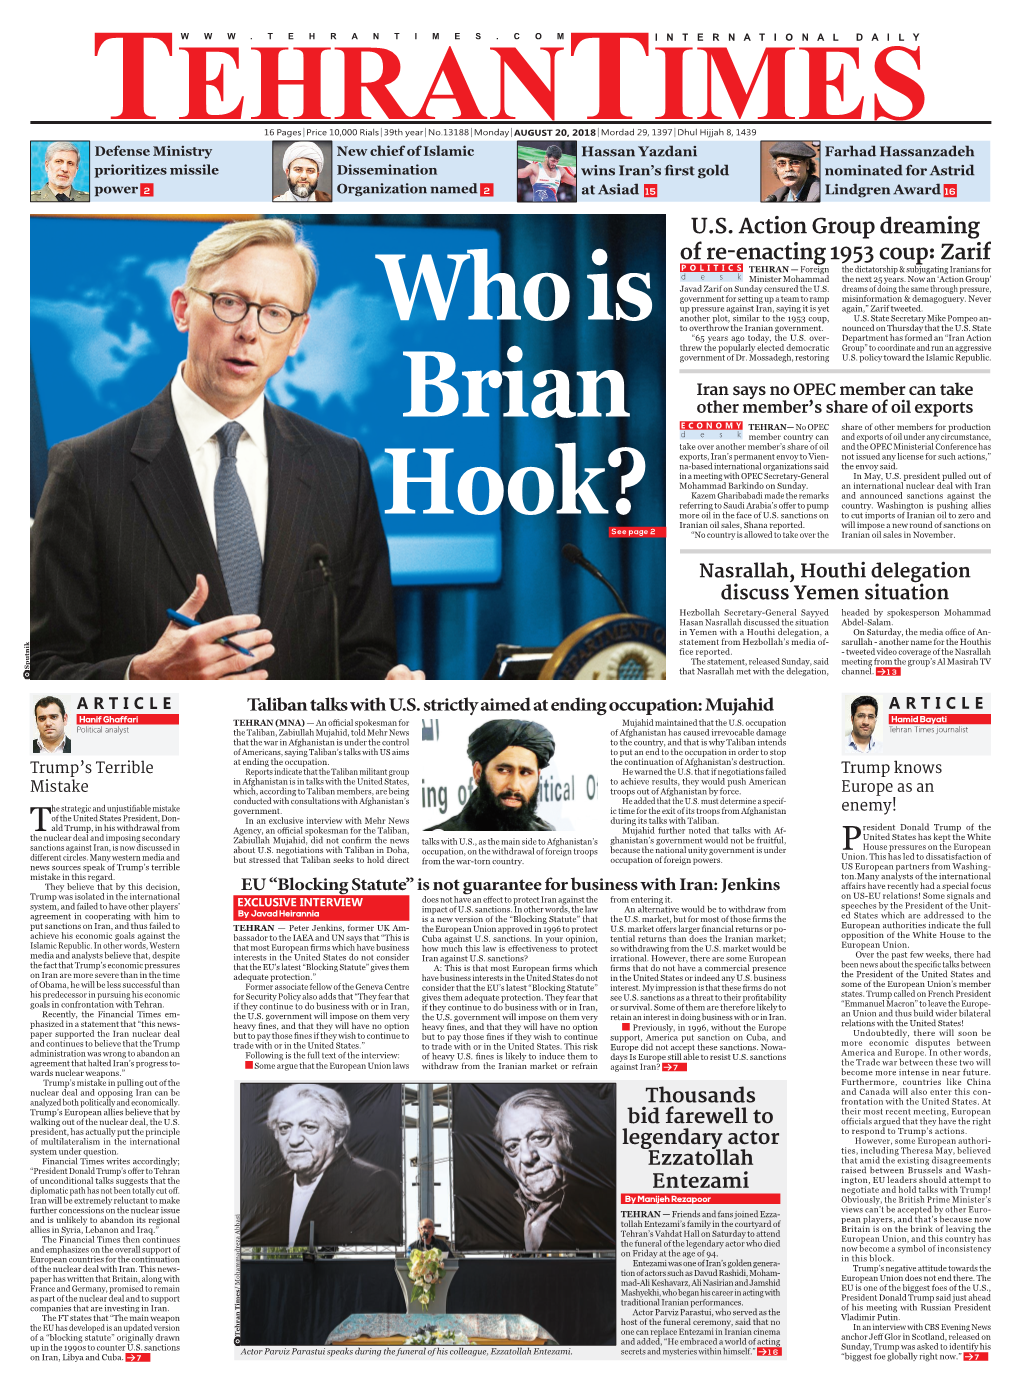 Who Is Brian Hook? This Group,” the ICCIMA Said in a Statement